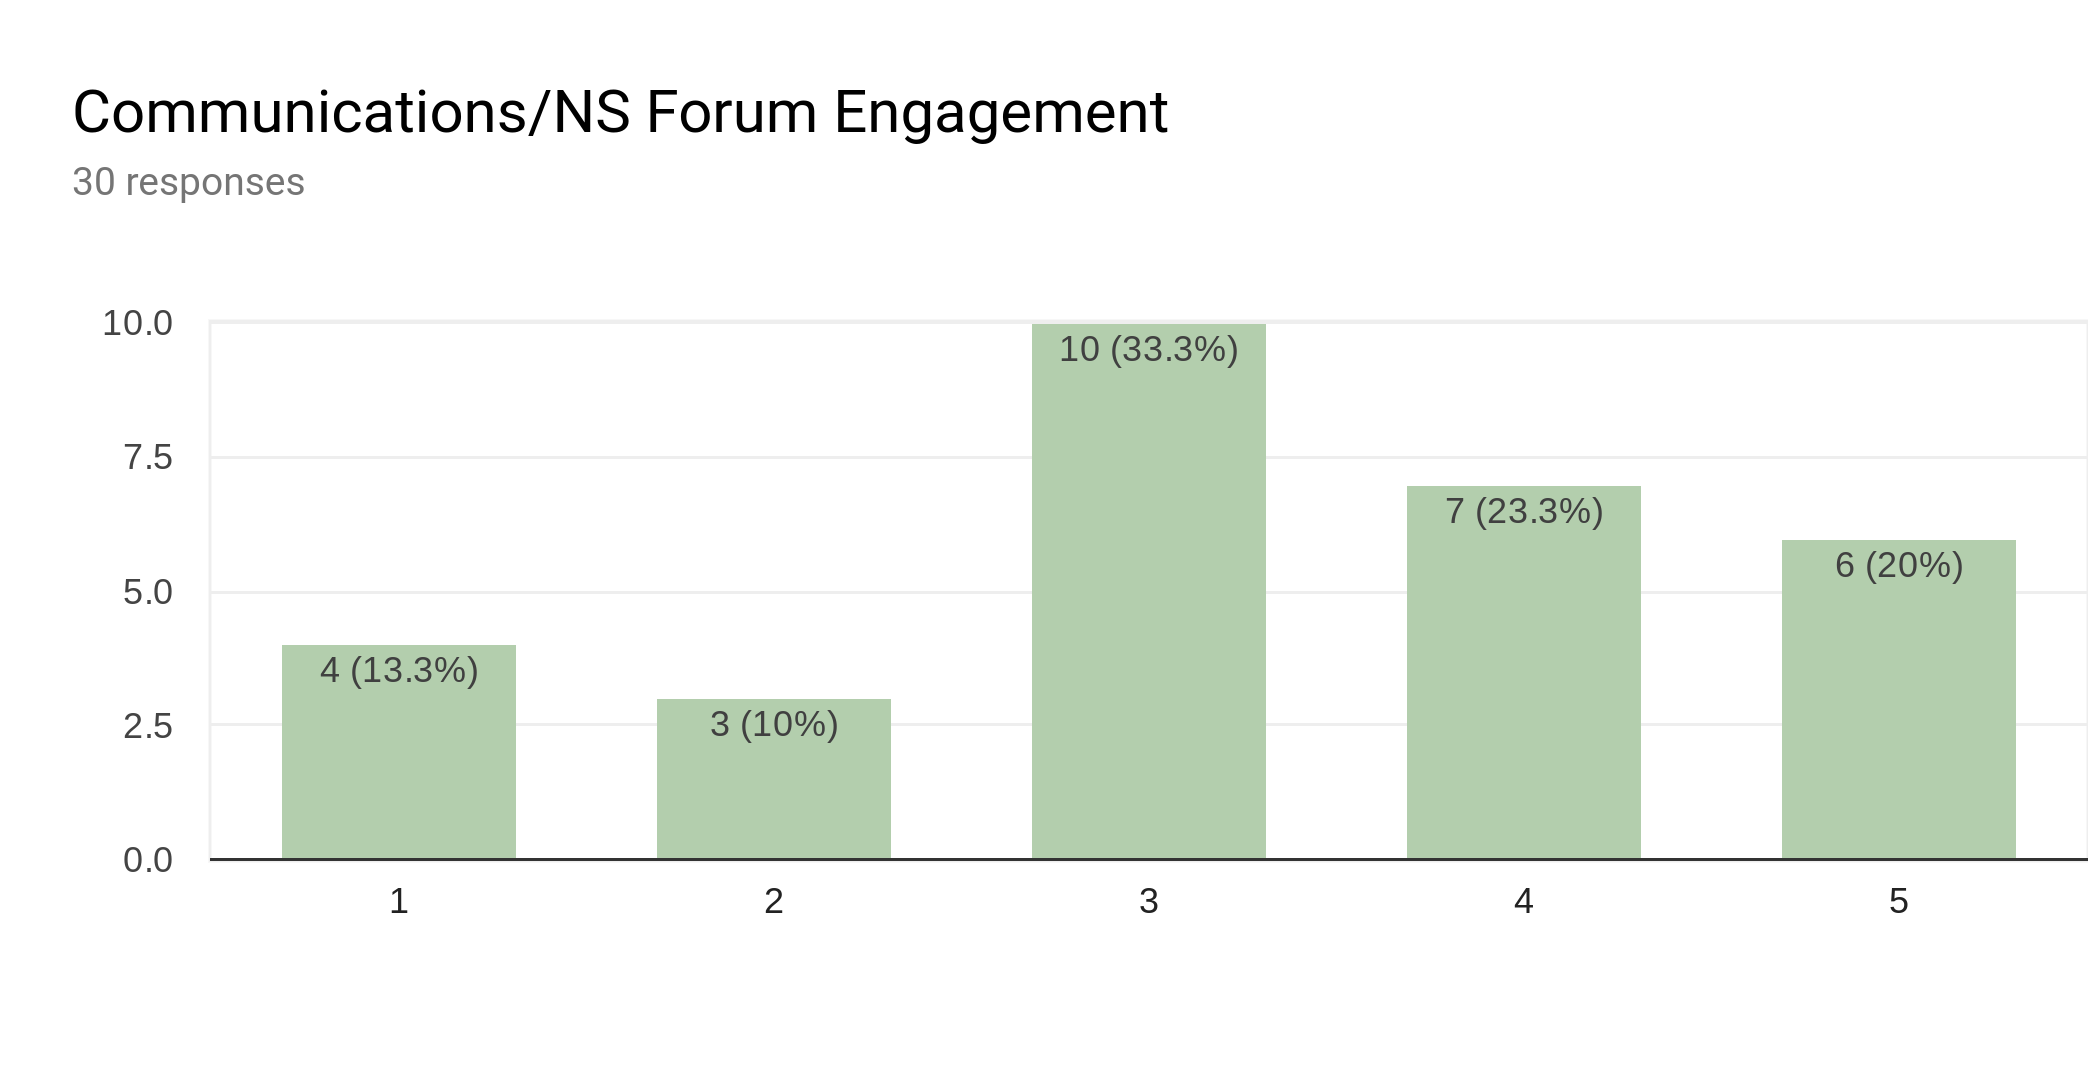 Forms response chart. Question title: Communications/NS Forum Engagement. Number of responses: 30 responses.